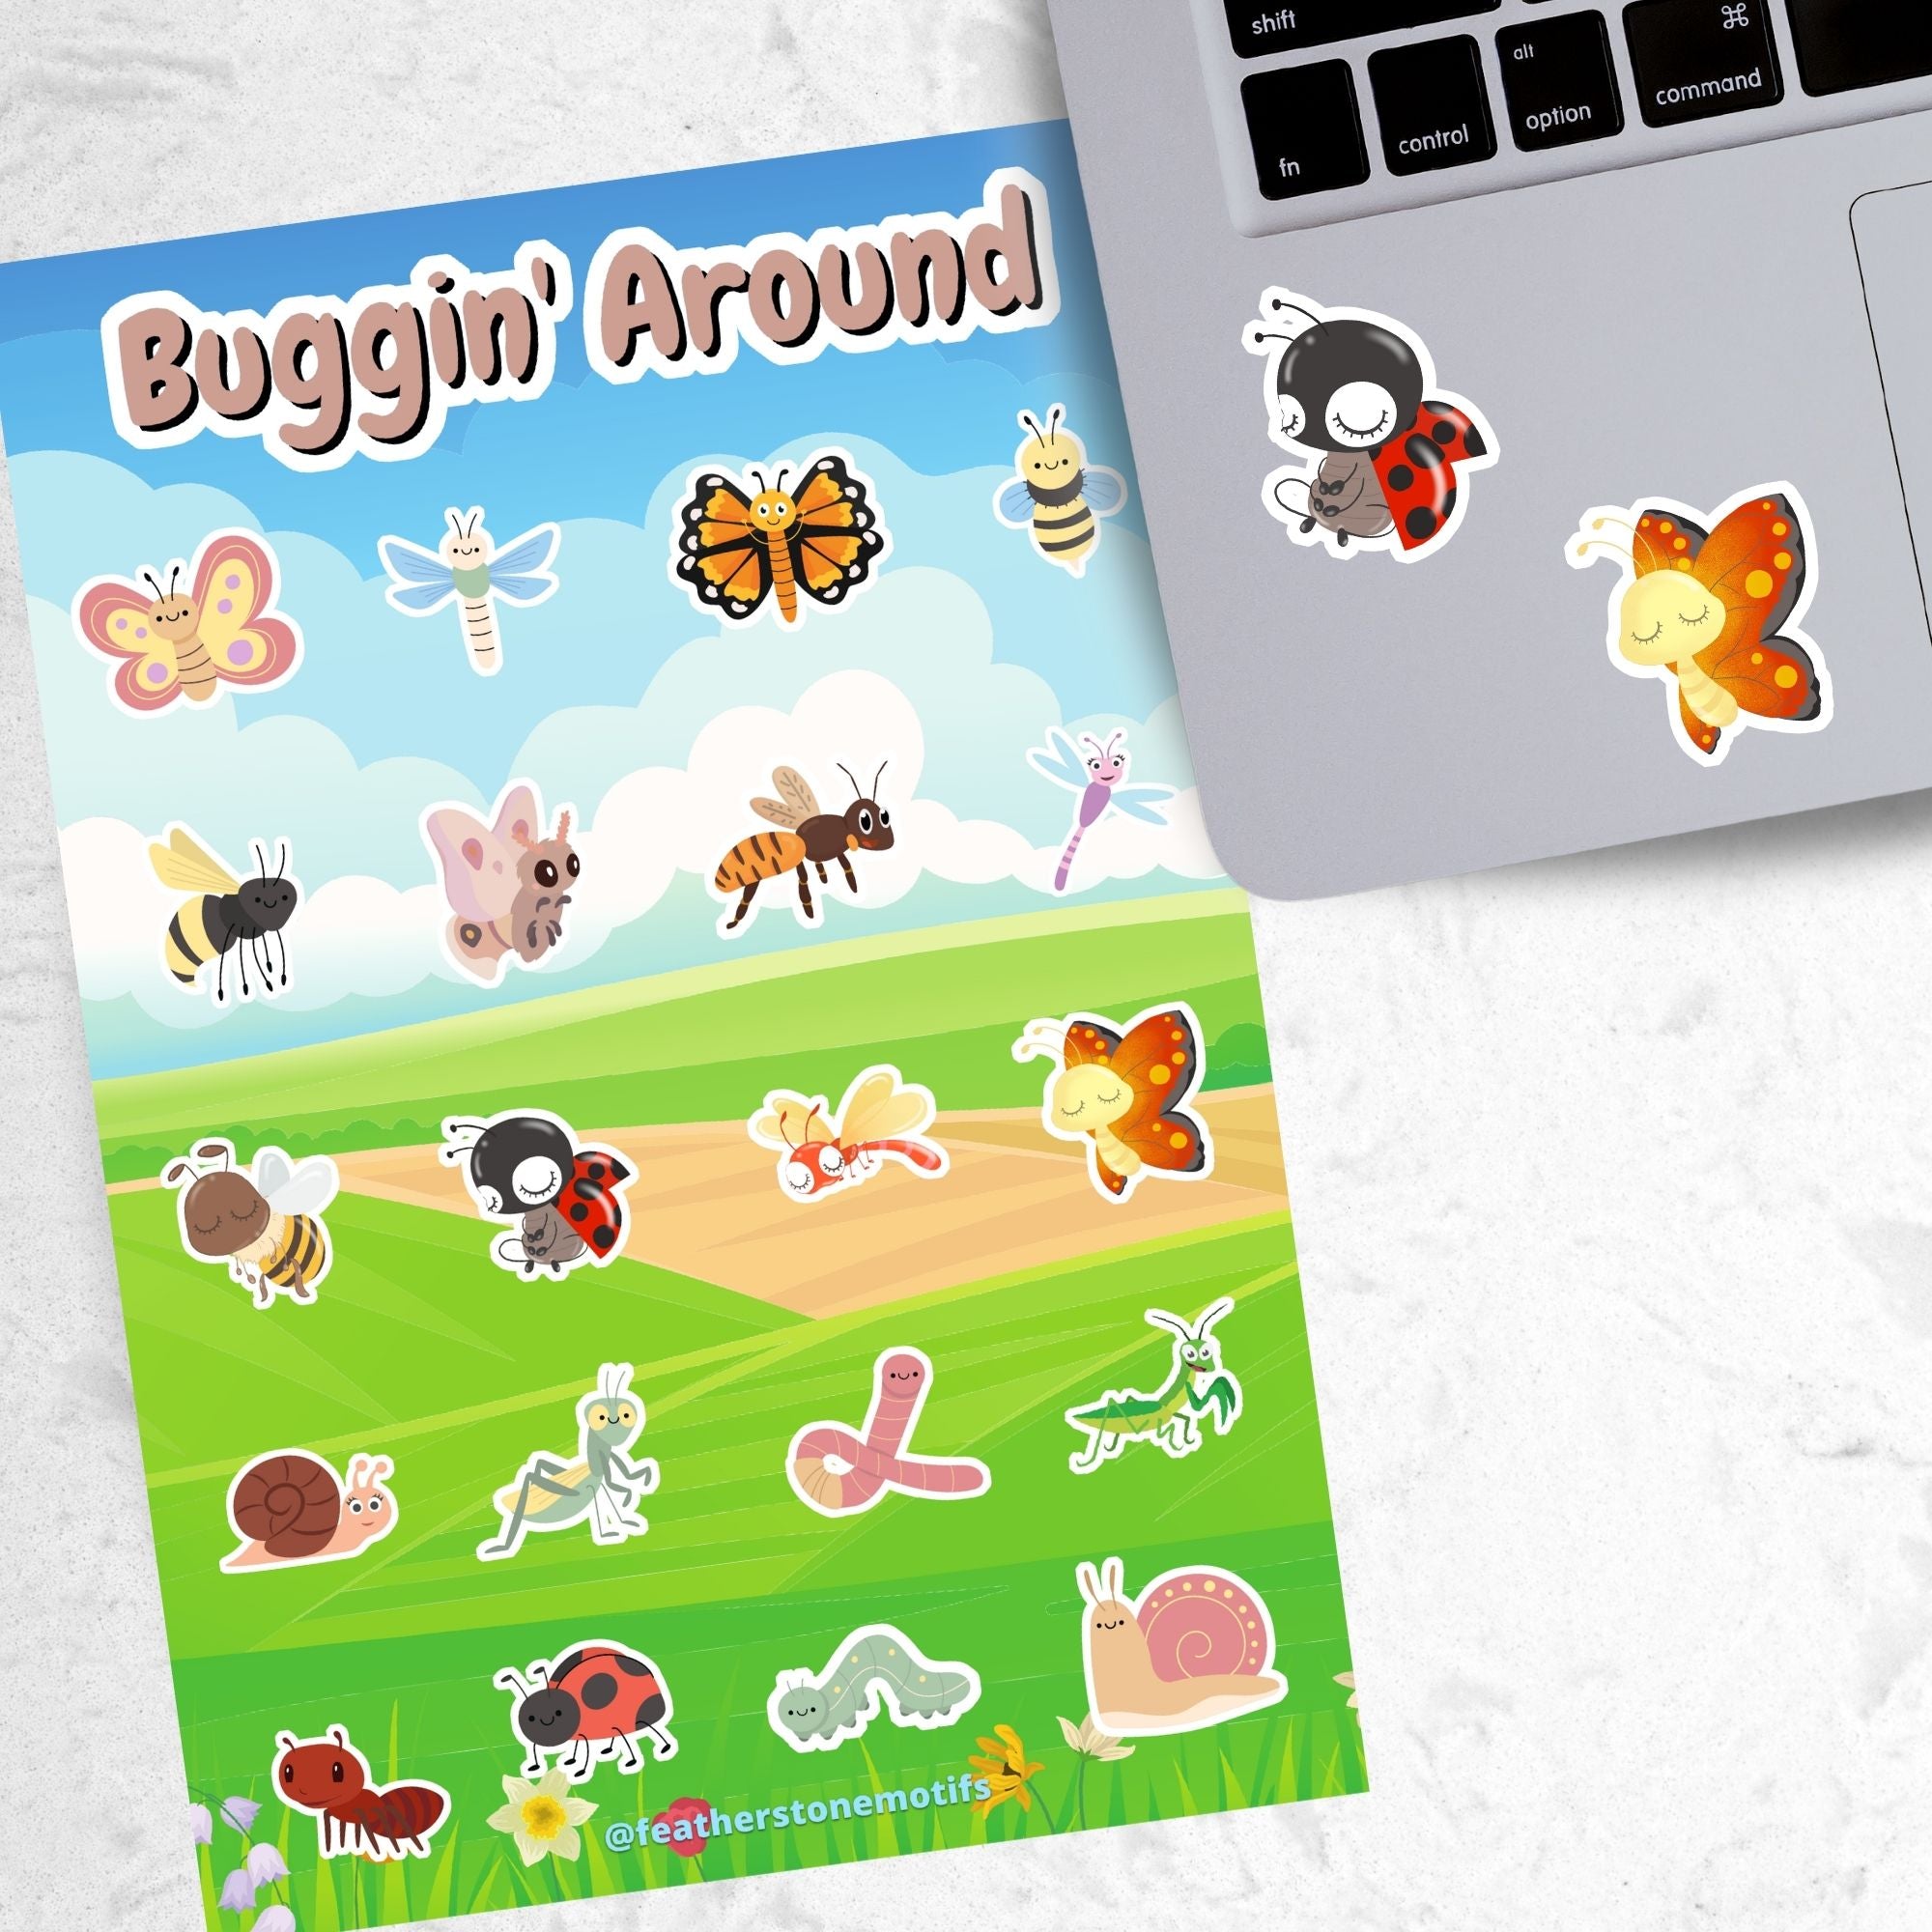 Butterflies, bees, worms, snails, and dragonfly's; this sticker sheet has cute stickers of all of your favorite bugs. This image shows the sticker sheet next to an open laptop with a ladybug sticker and a butterfly sticker applied below the keyboard.